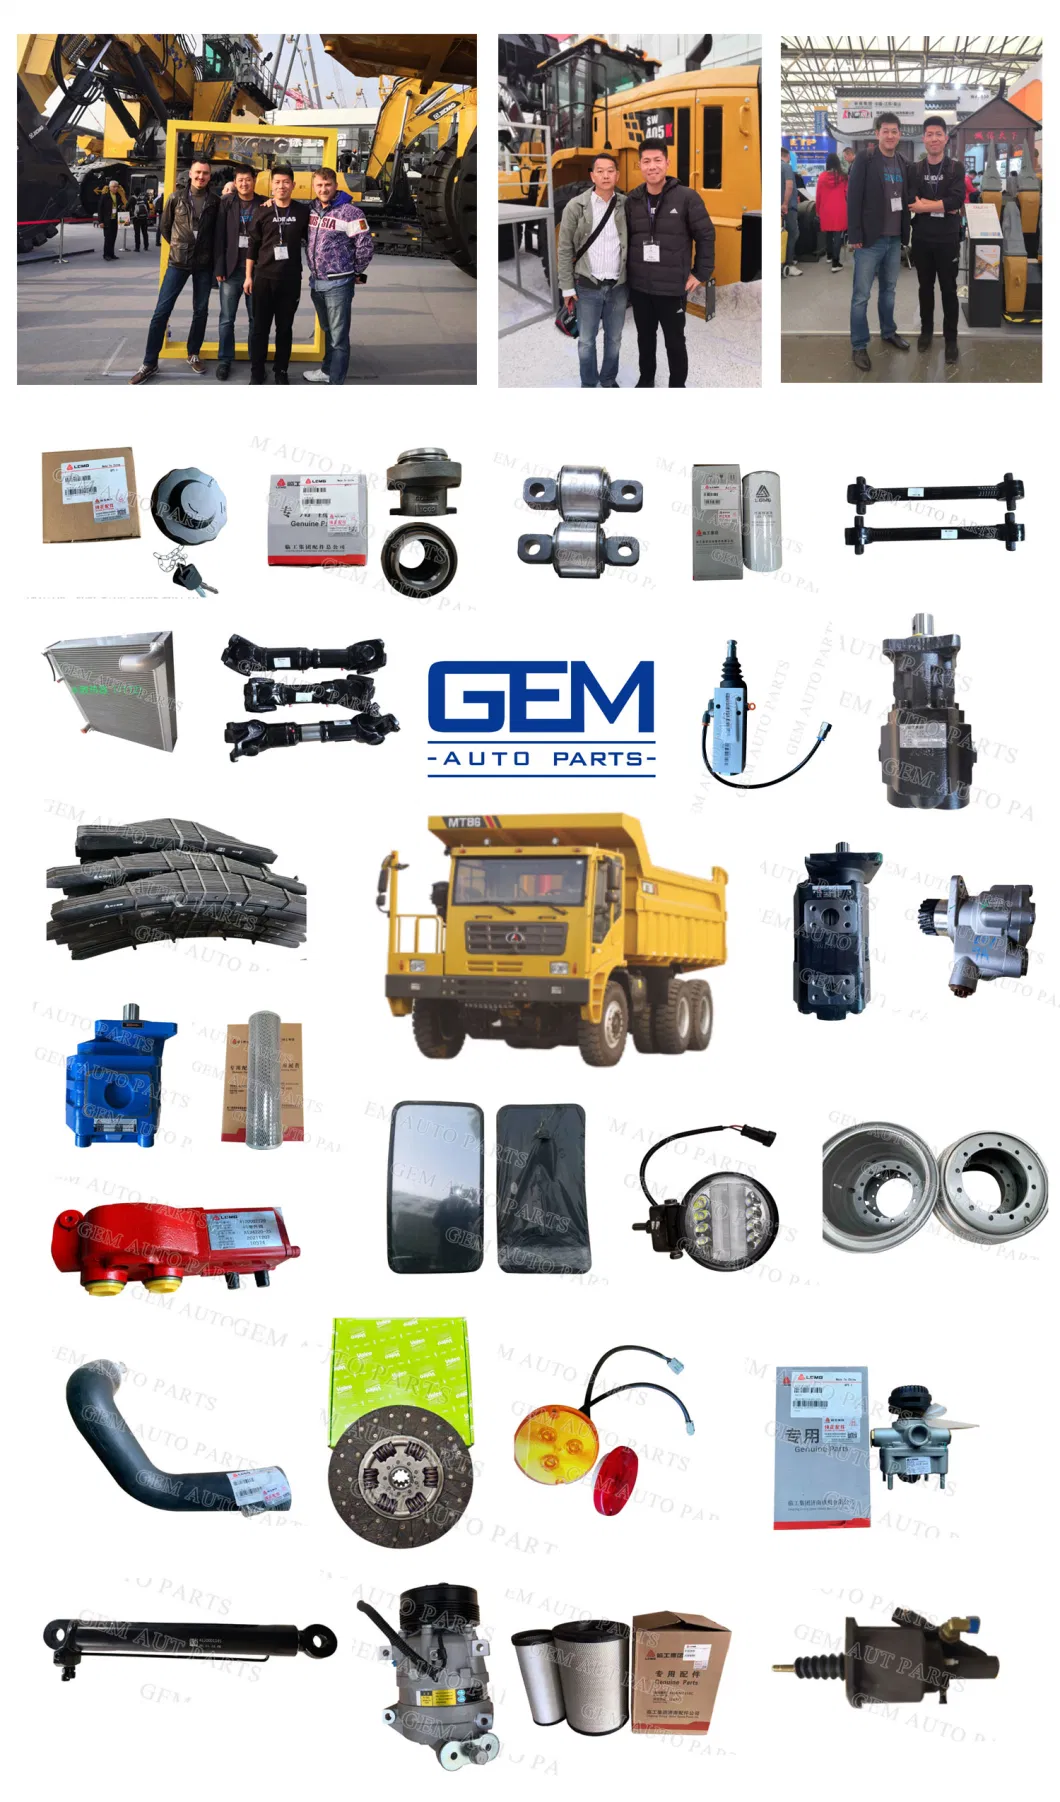 Mining Truck Spare Parts for HOWO Beiben Sinotruk FAW Shacman